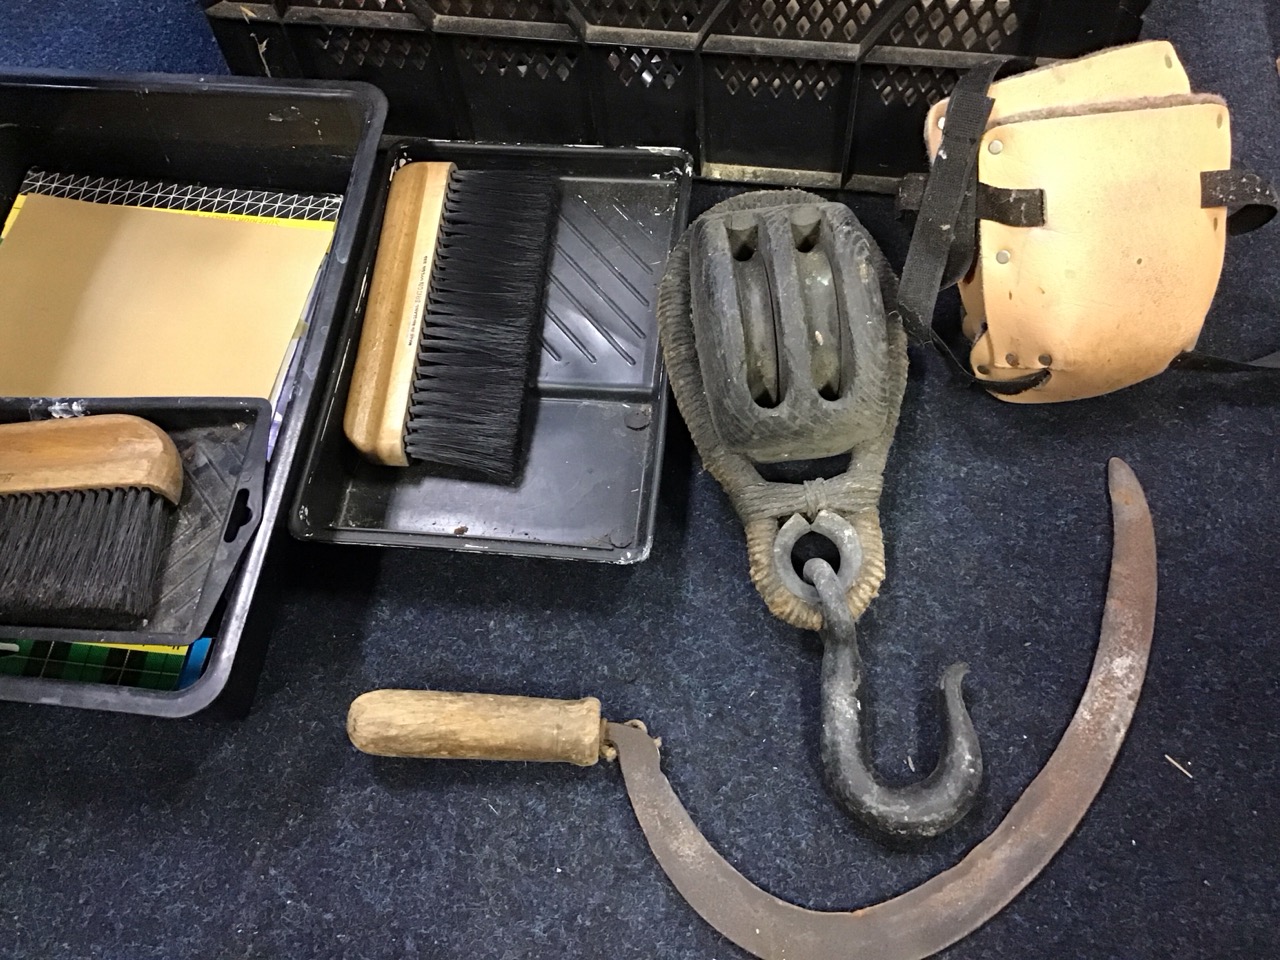 Miscellaneous tools including a double pulley block, a sickle, a drill, a axe, a brass pumped spray, - Image 3 of 3